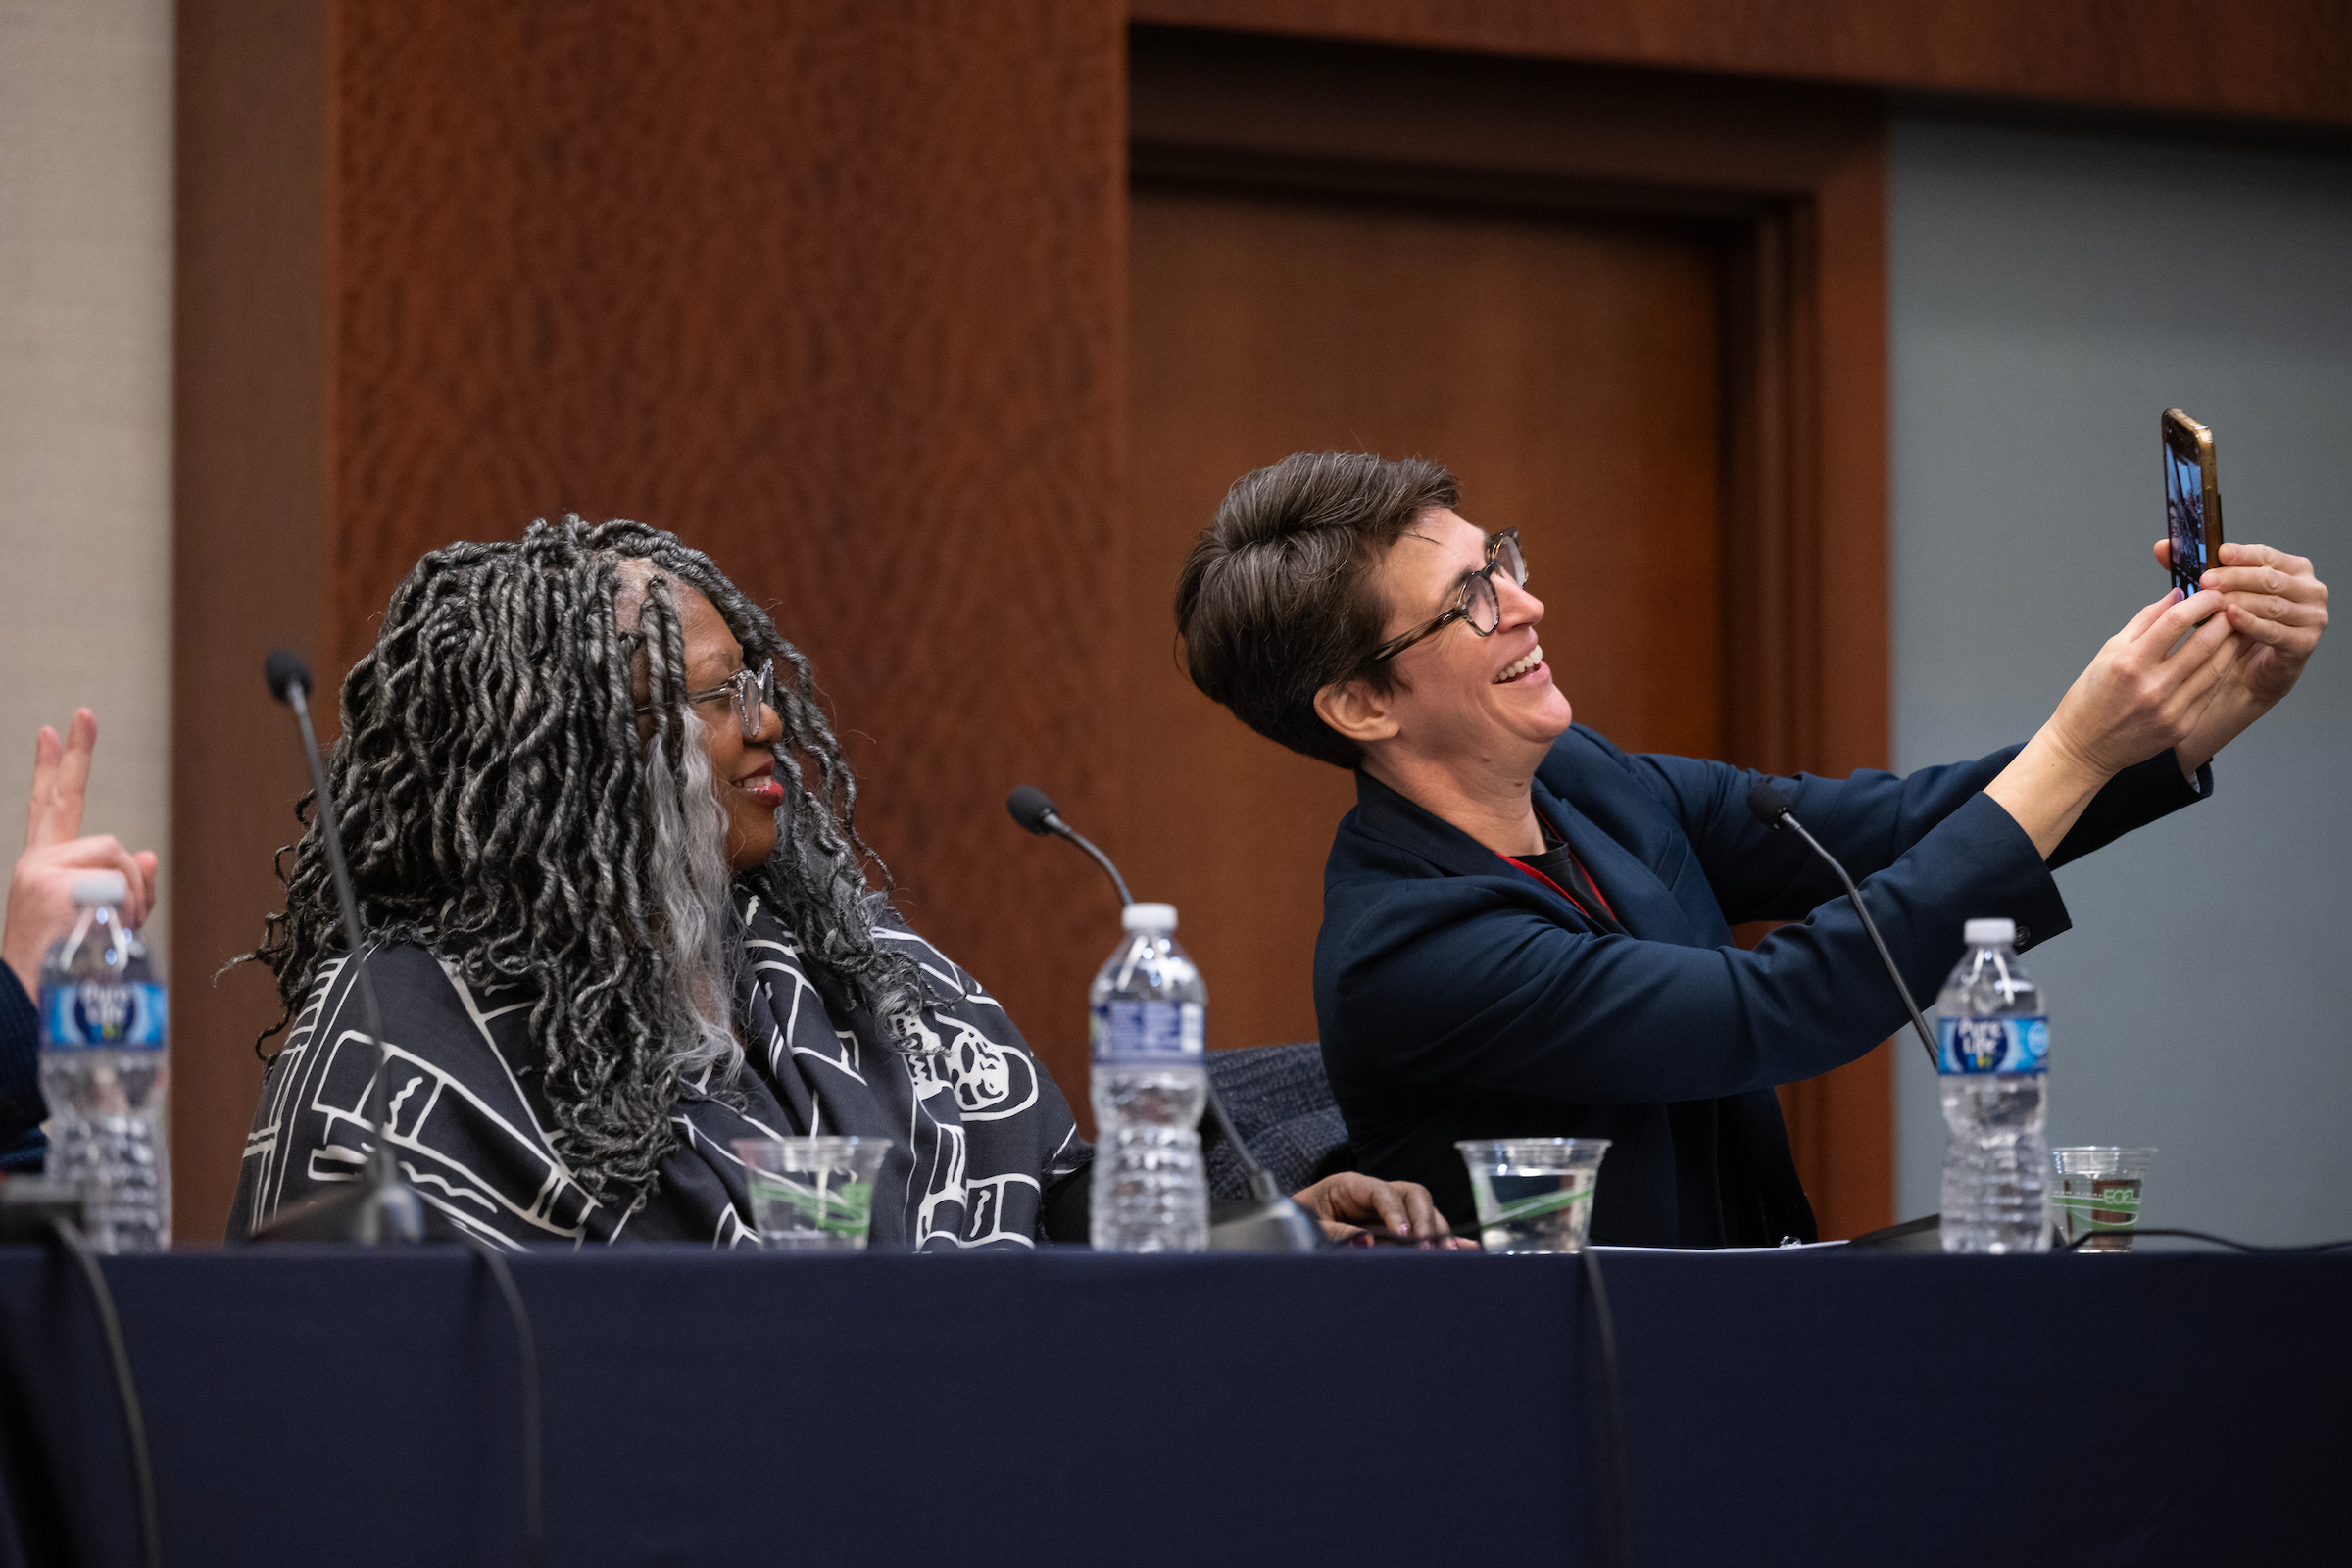 Two women at a panel with the one on the right holding up her cellphone to take a selfie with the other woman